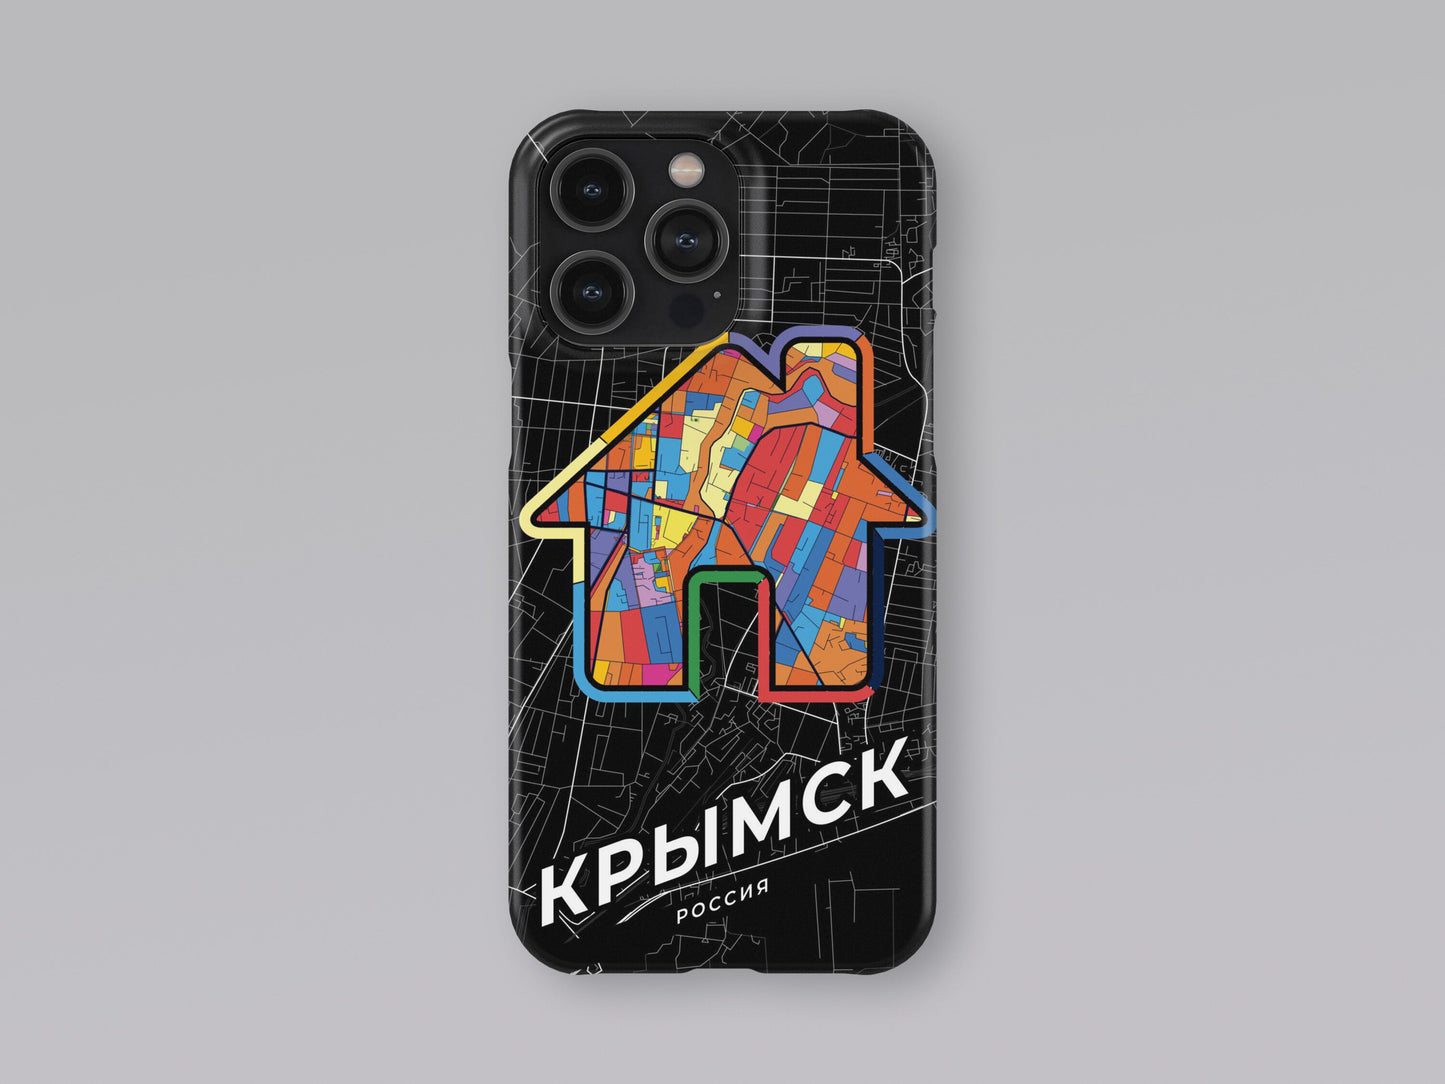 Krymsk Russia slim phone case with colorful icon. Birthday, wedding or housewarming gift. Couple match cases. 3